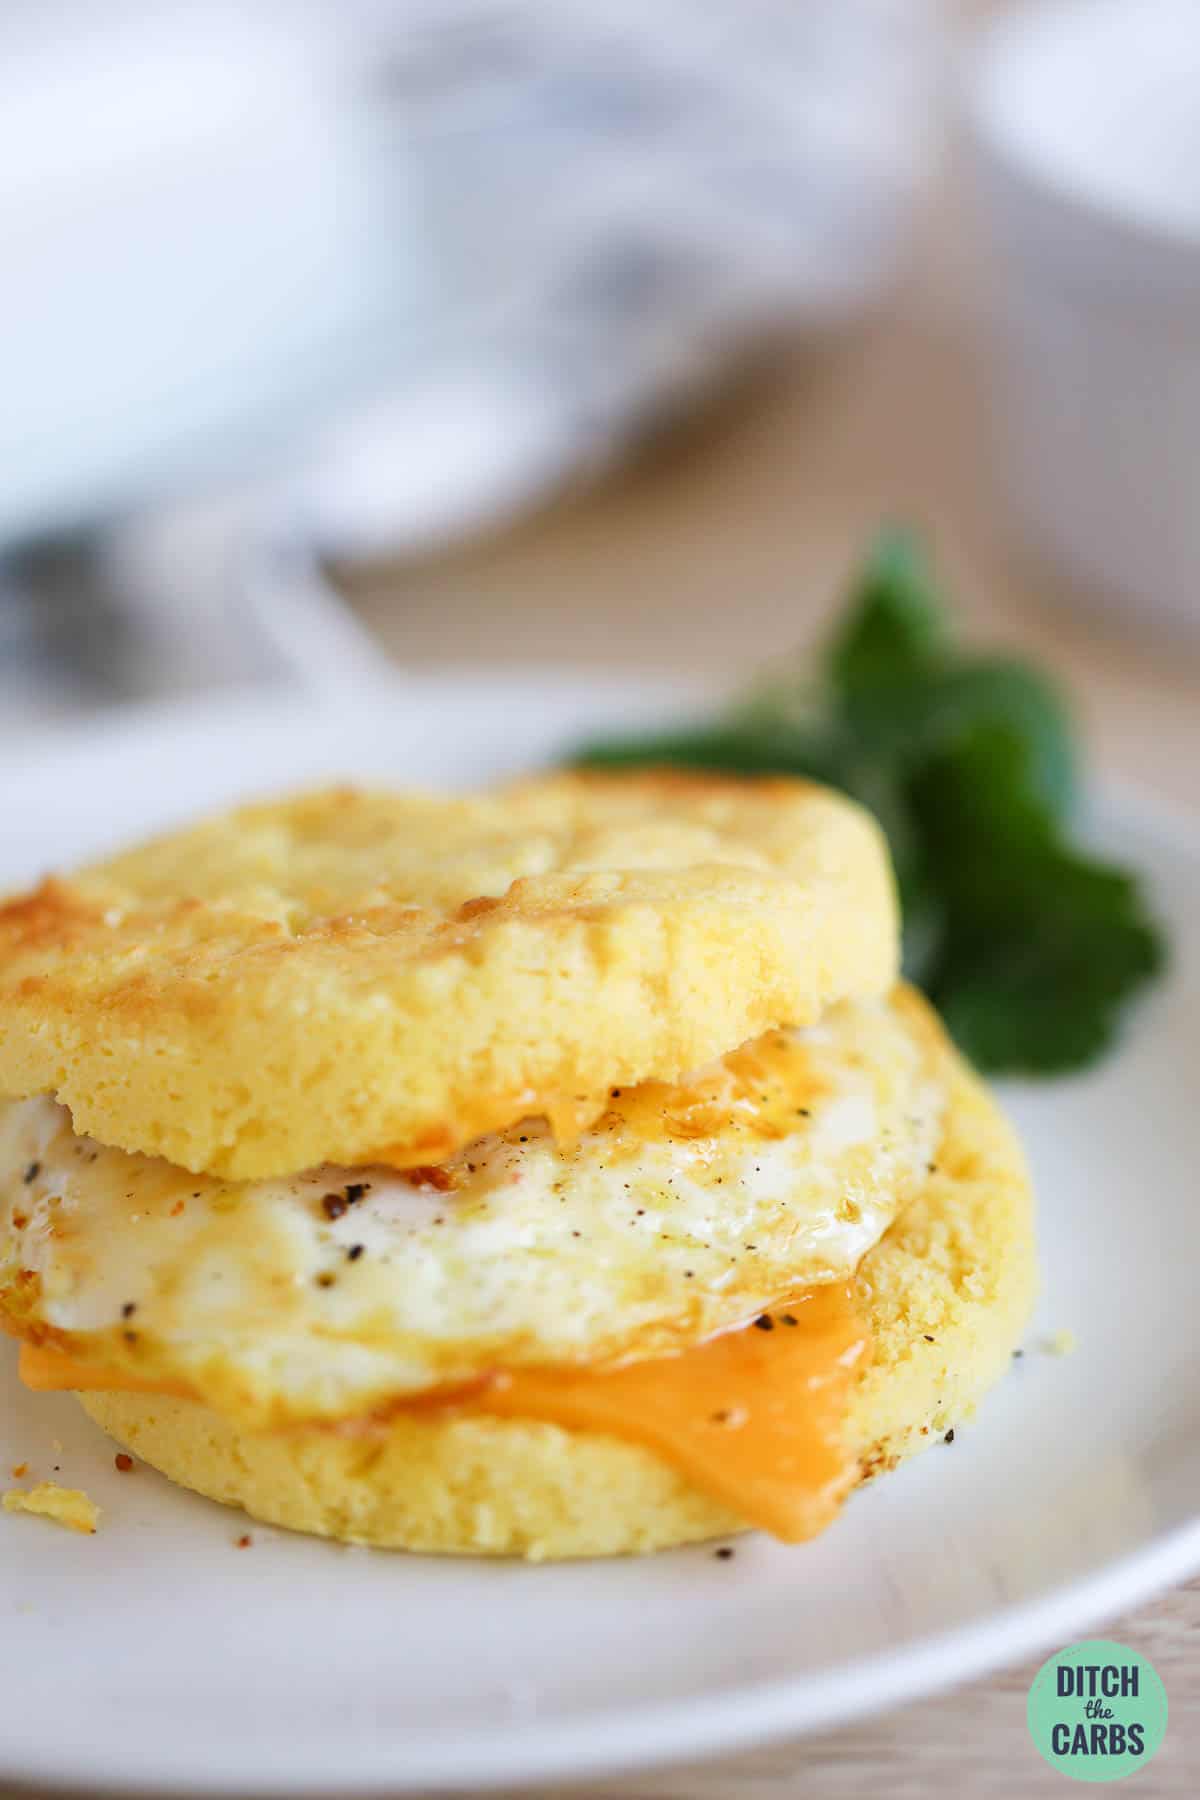 Low-carb English muffin topped with a fried egg and slice of cheese to make an egg breakfast sandwich.